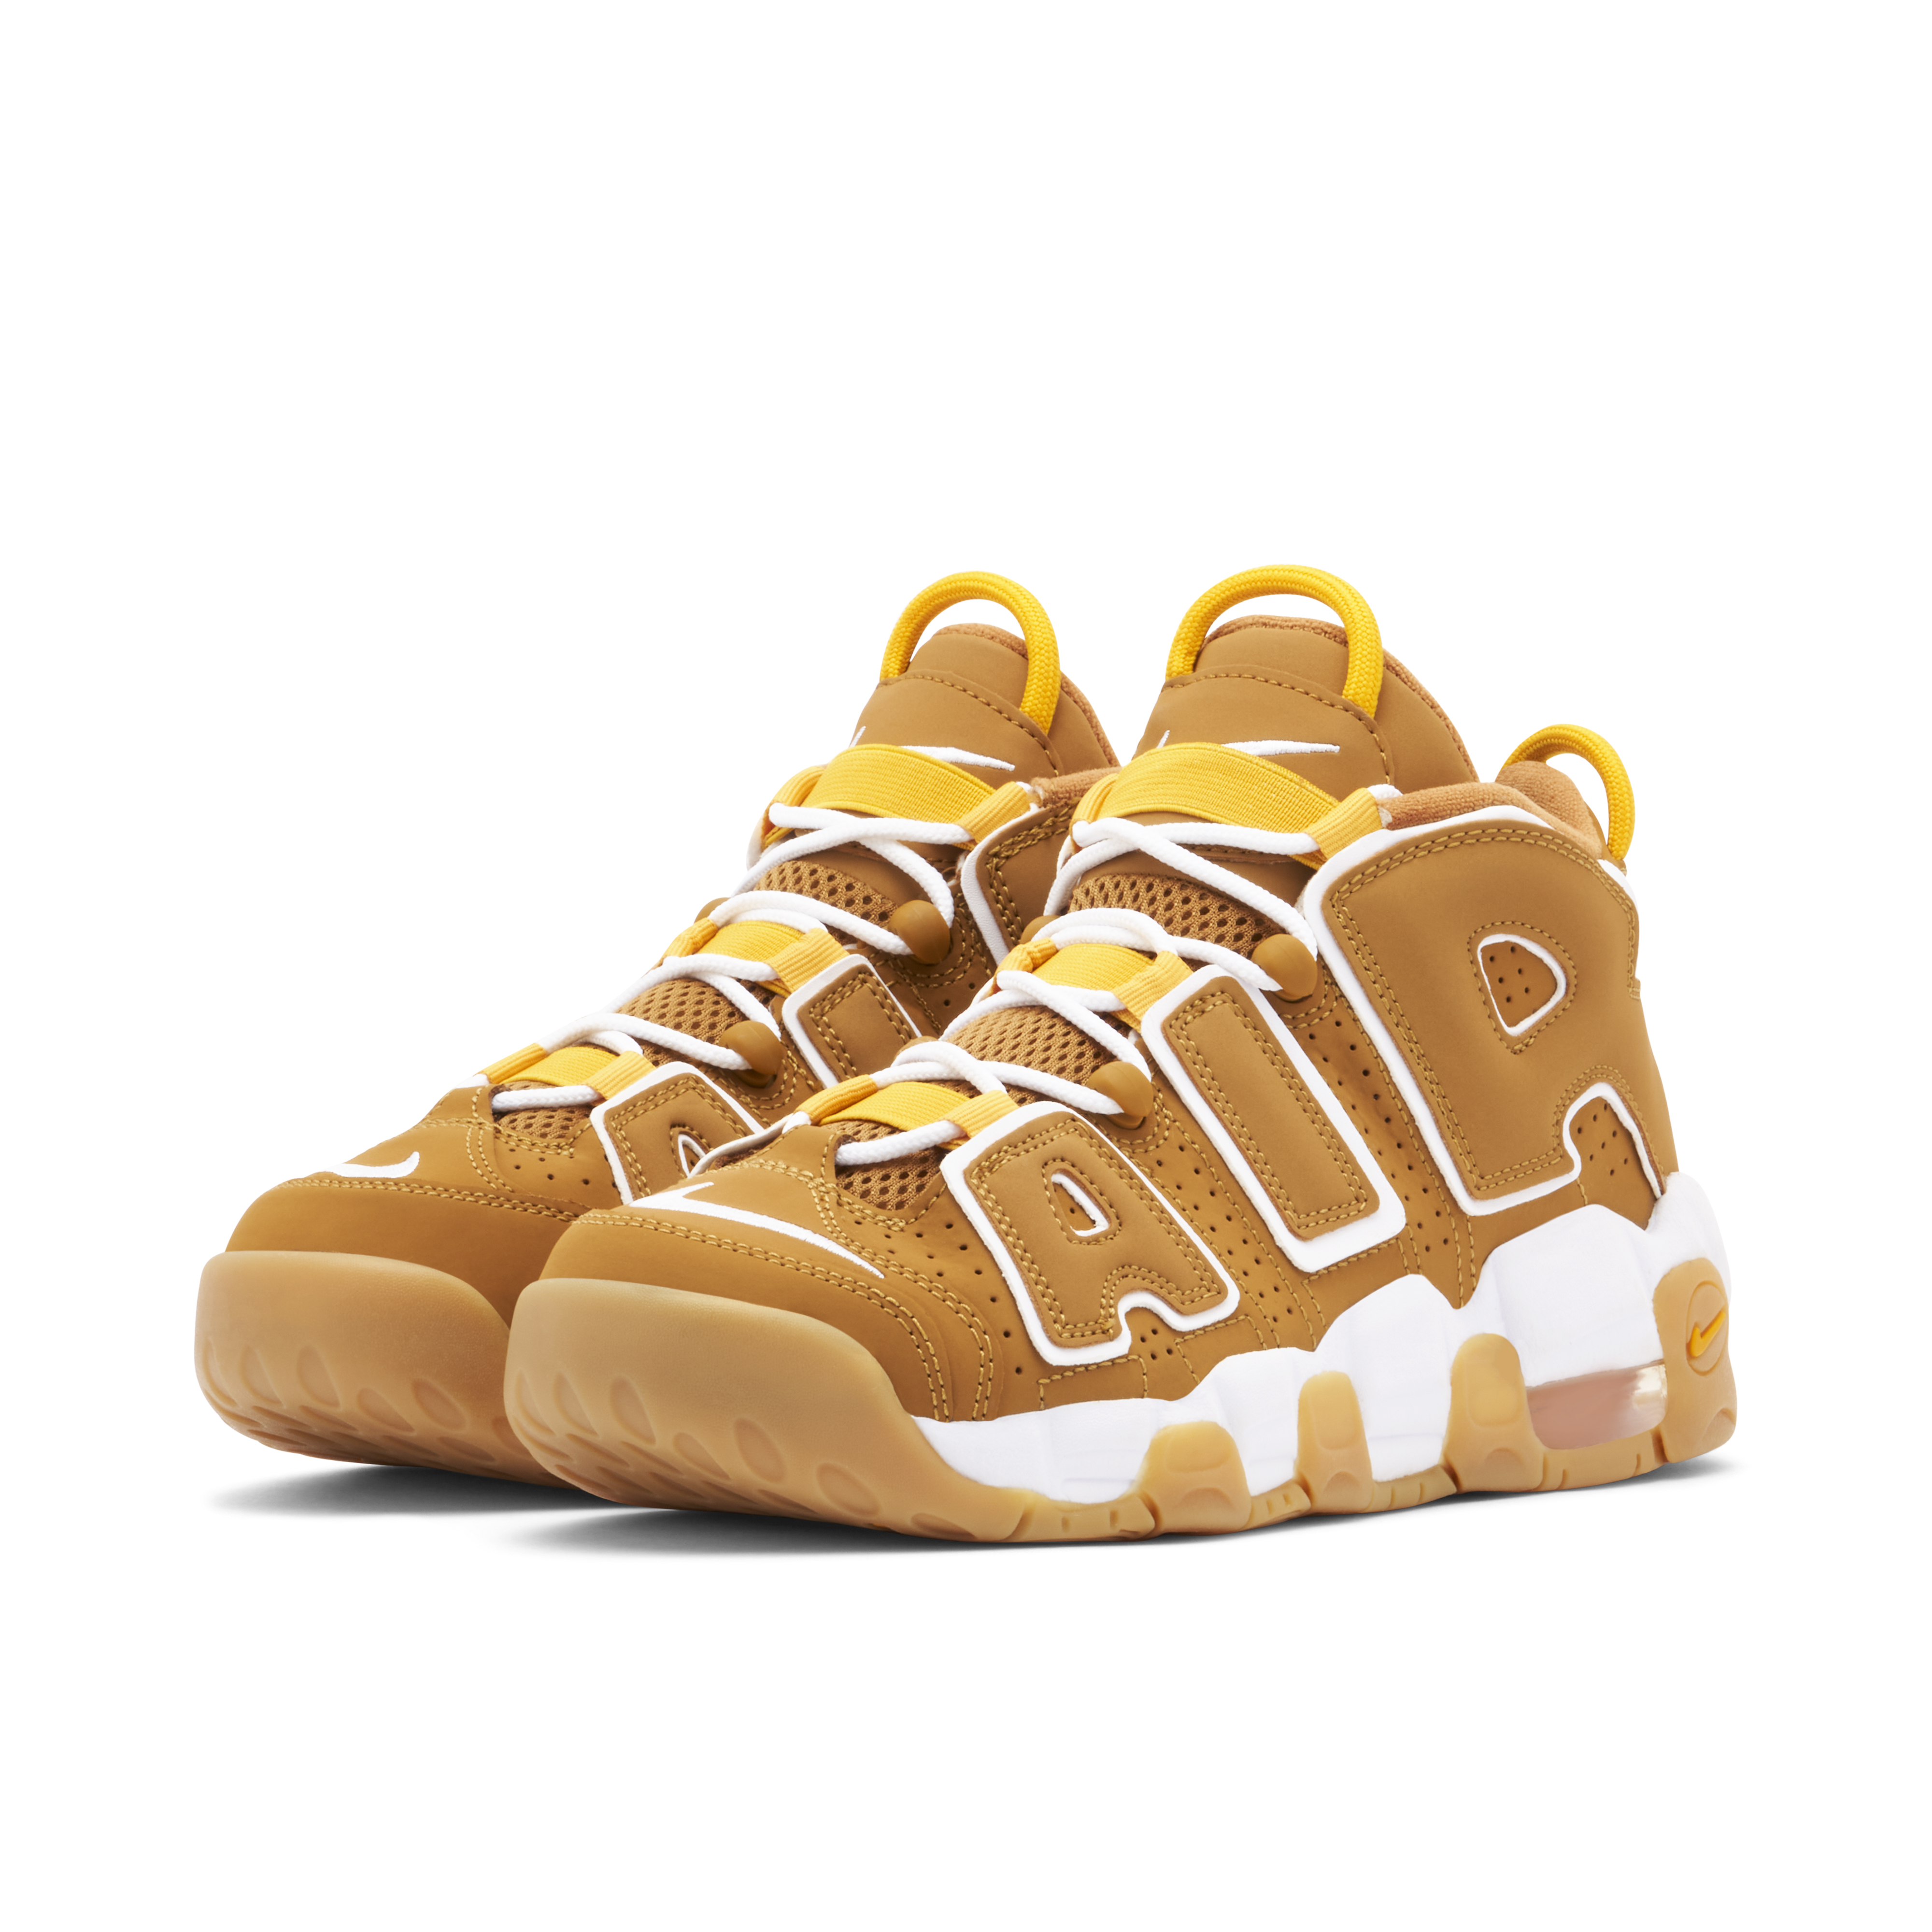 Nike Air More Uptempo GS Wheat - Now online! – SneakerBAAS